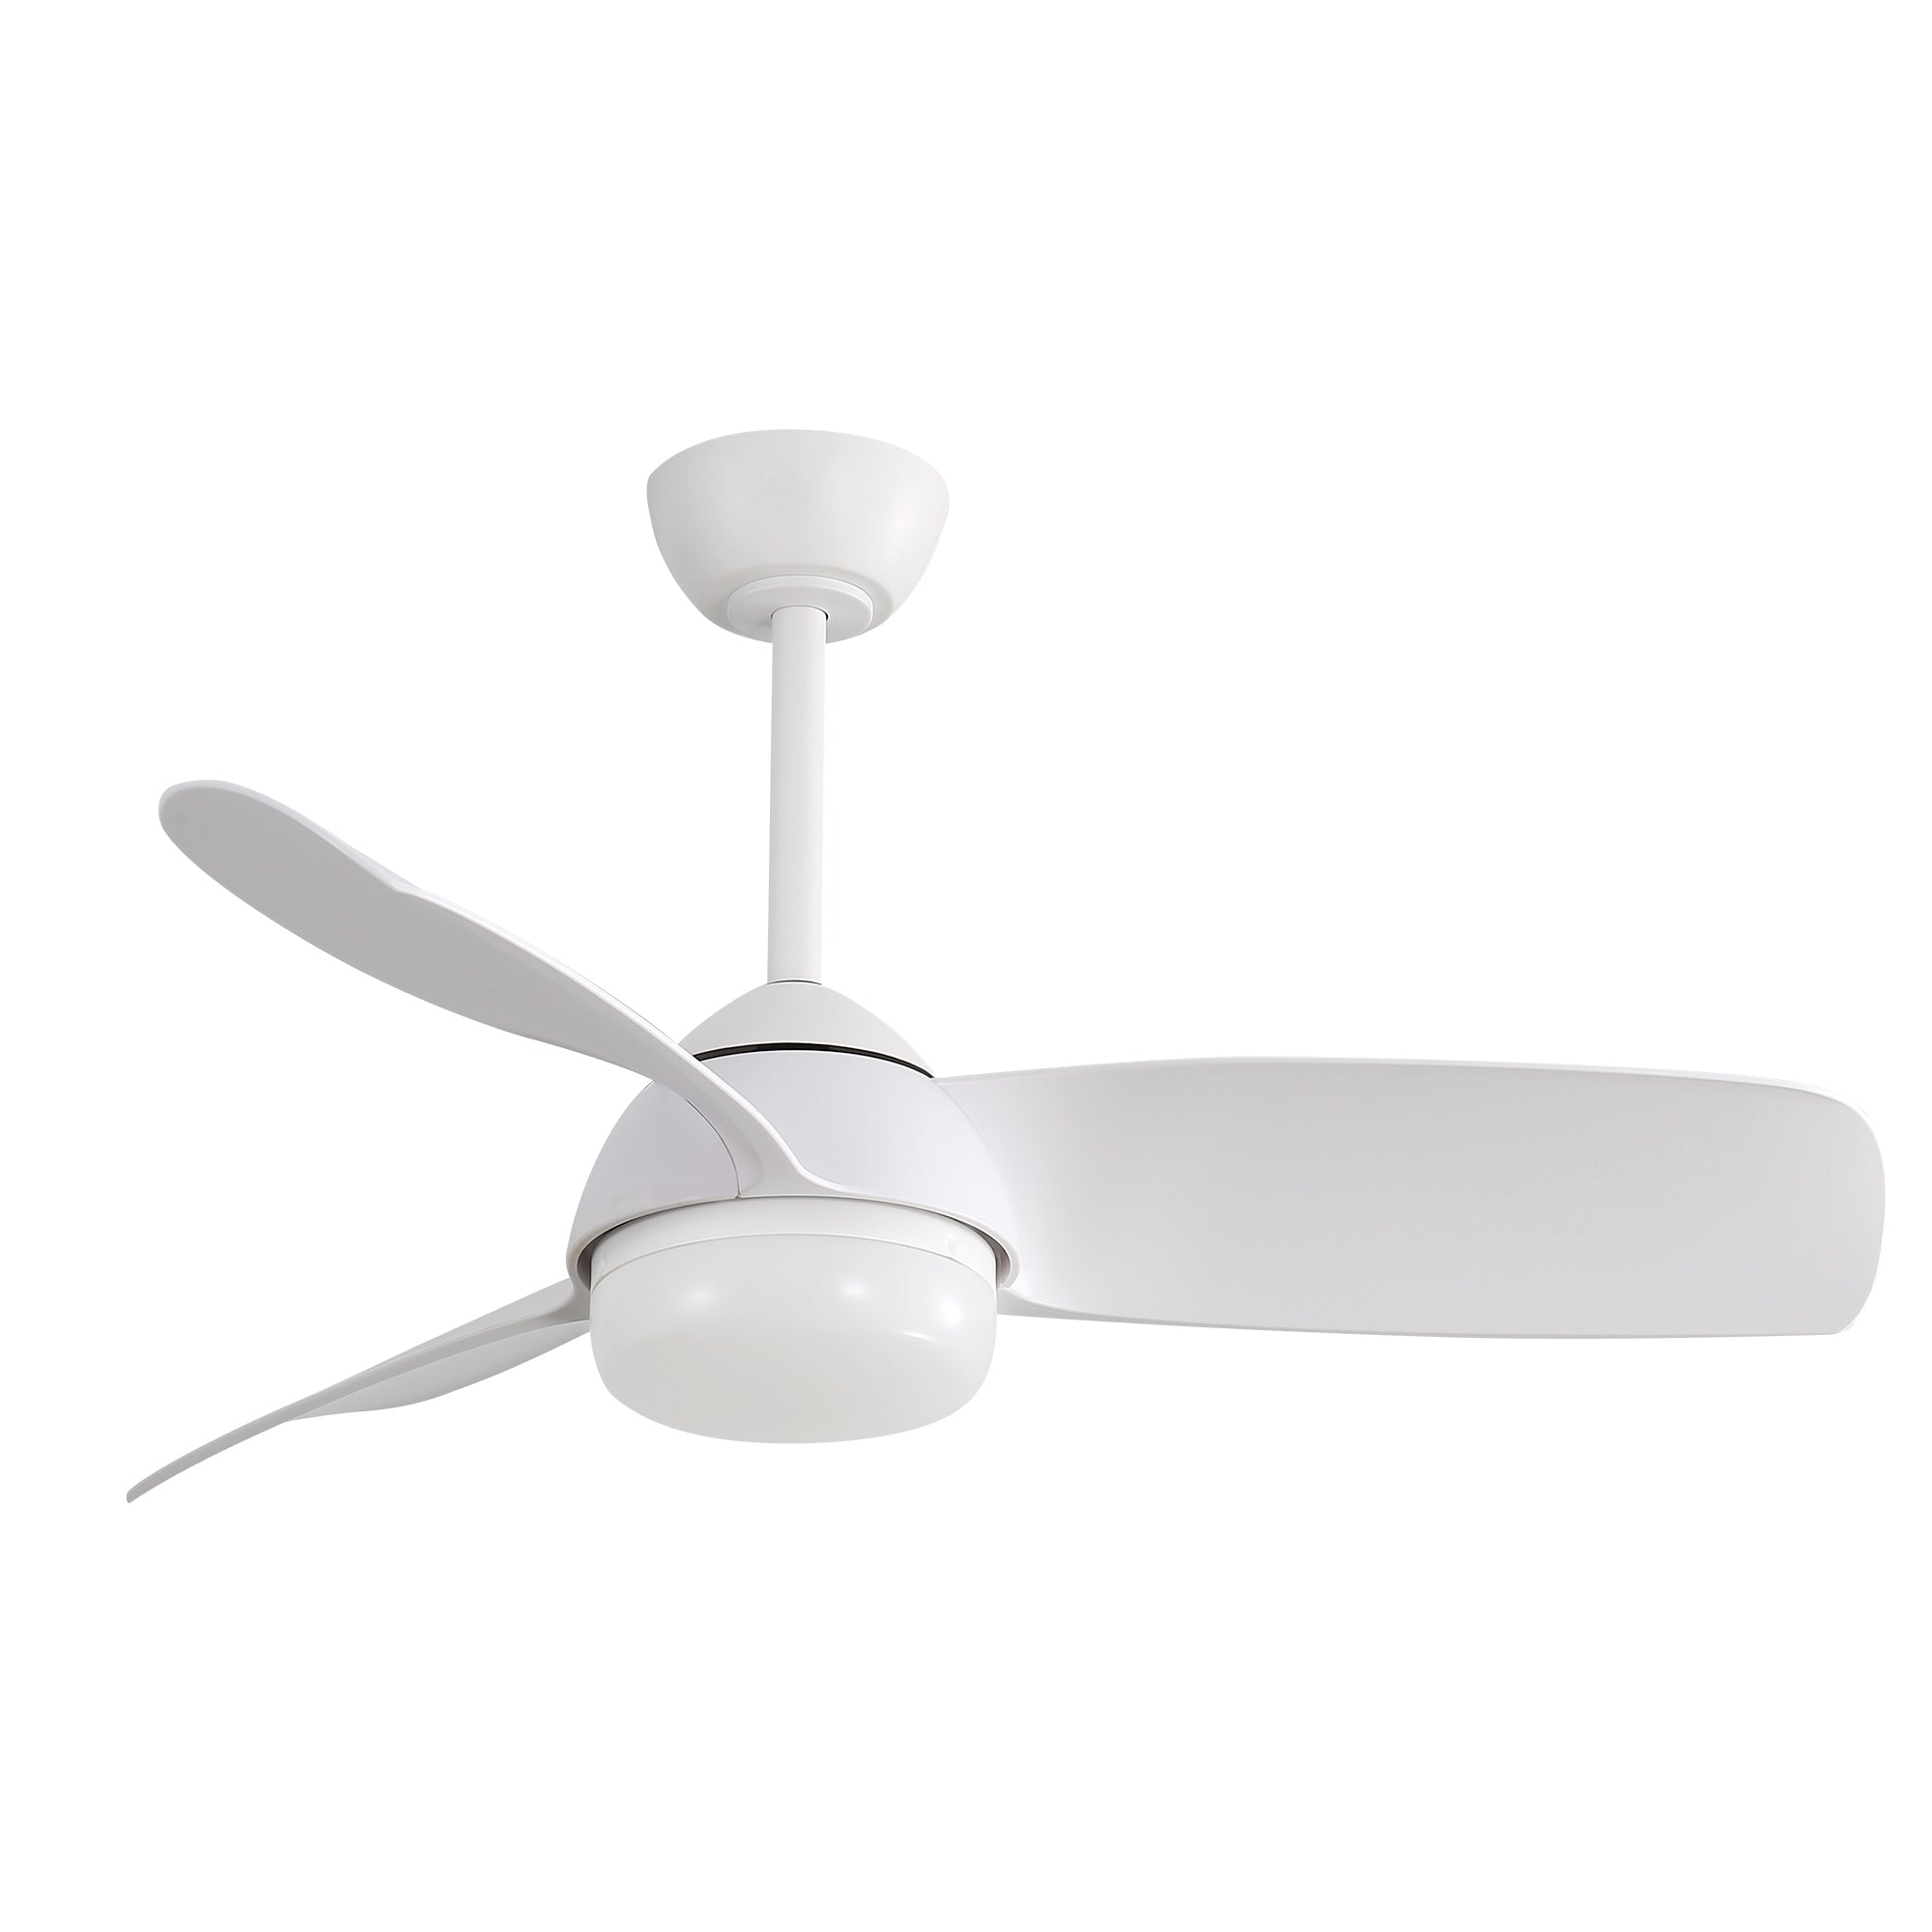 42 Inch Decorative ABS Ceiling Fan With 6 Speed Remote white-abs